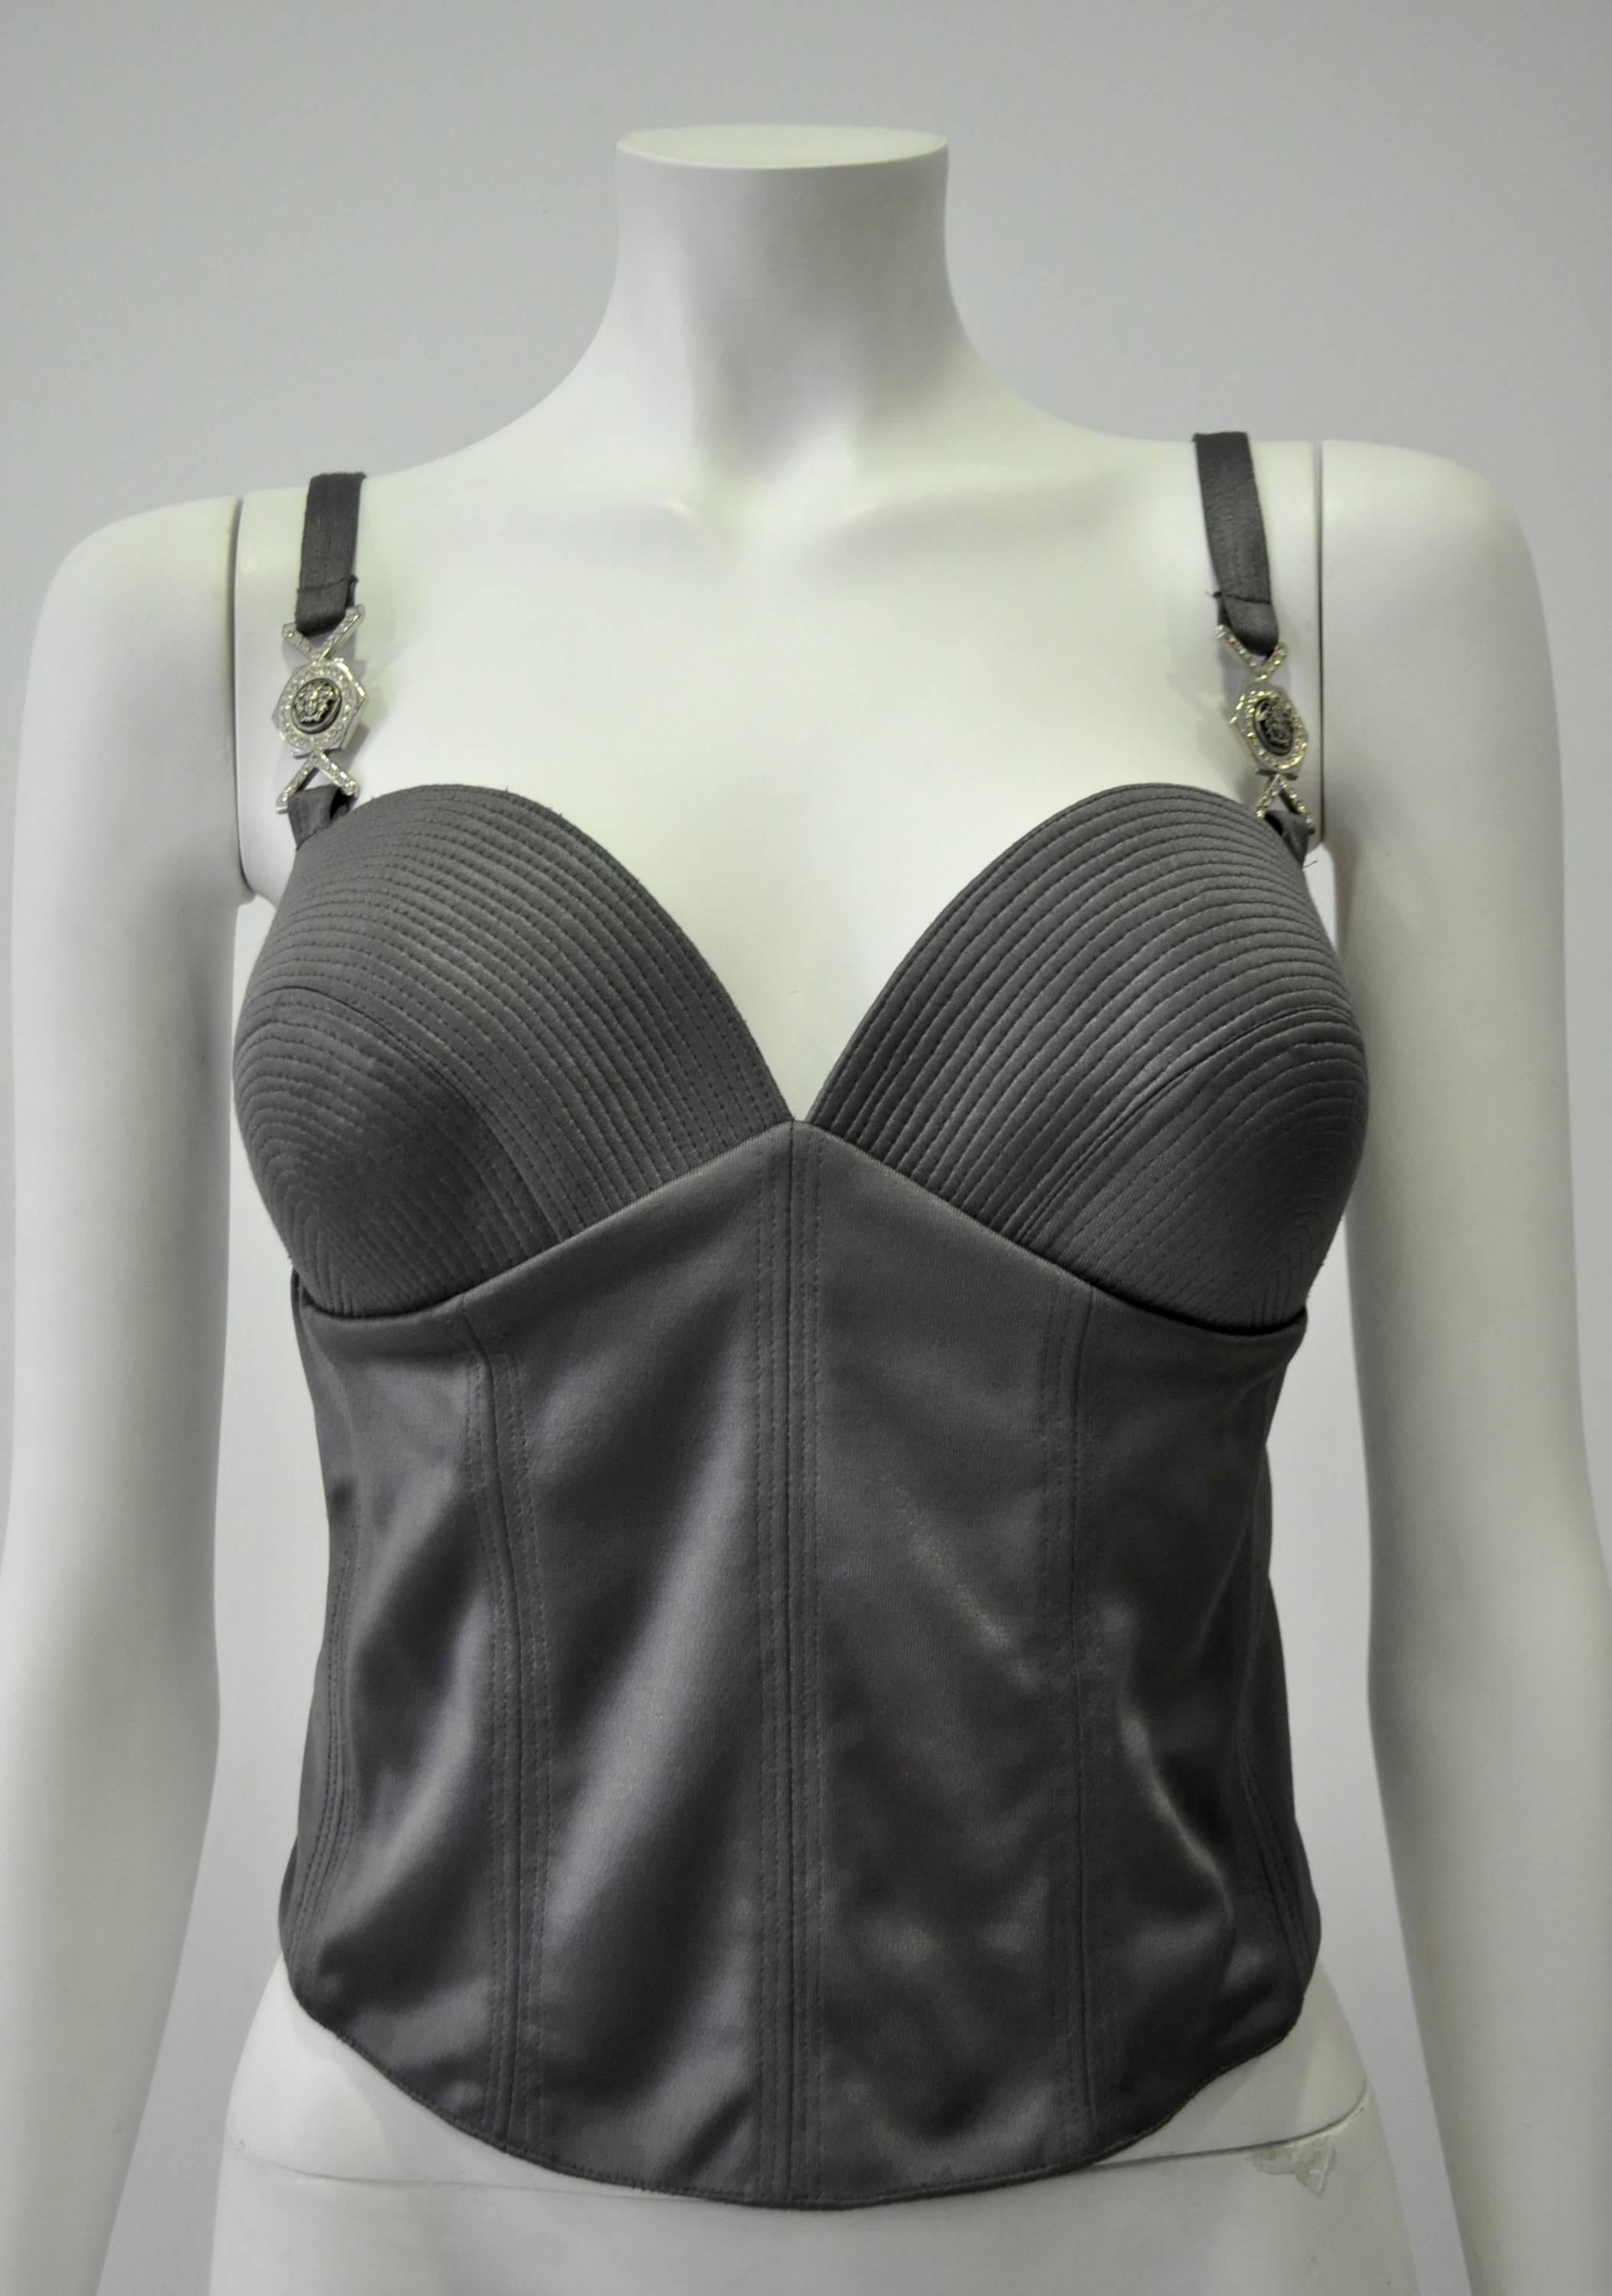 Iconic Gianni Versace Versatile Couture Anthracite Boned Bustier featuring Crystal Embellished Medusa Hardware at Straps